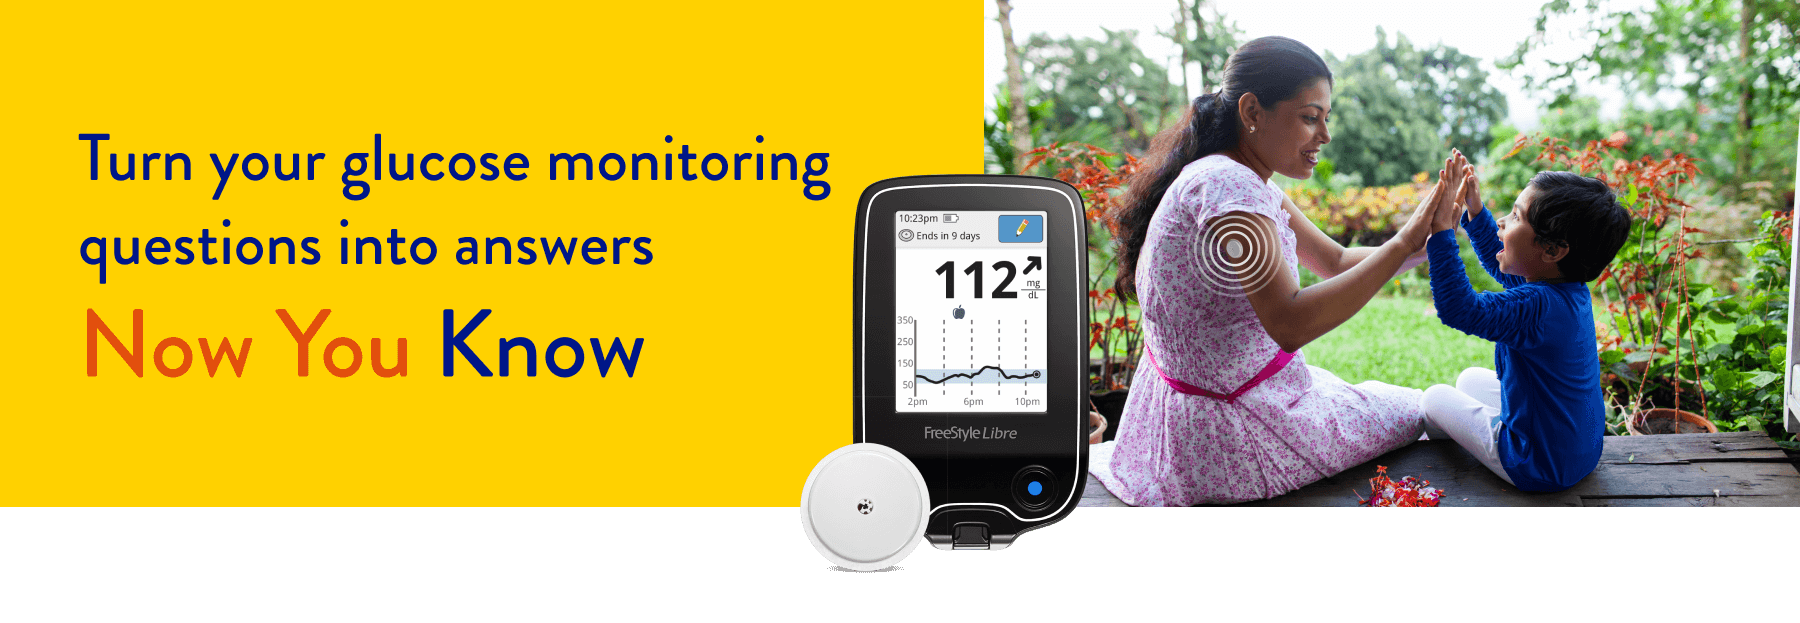 Turn your glucose monitoring questions into answers - Now you know